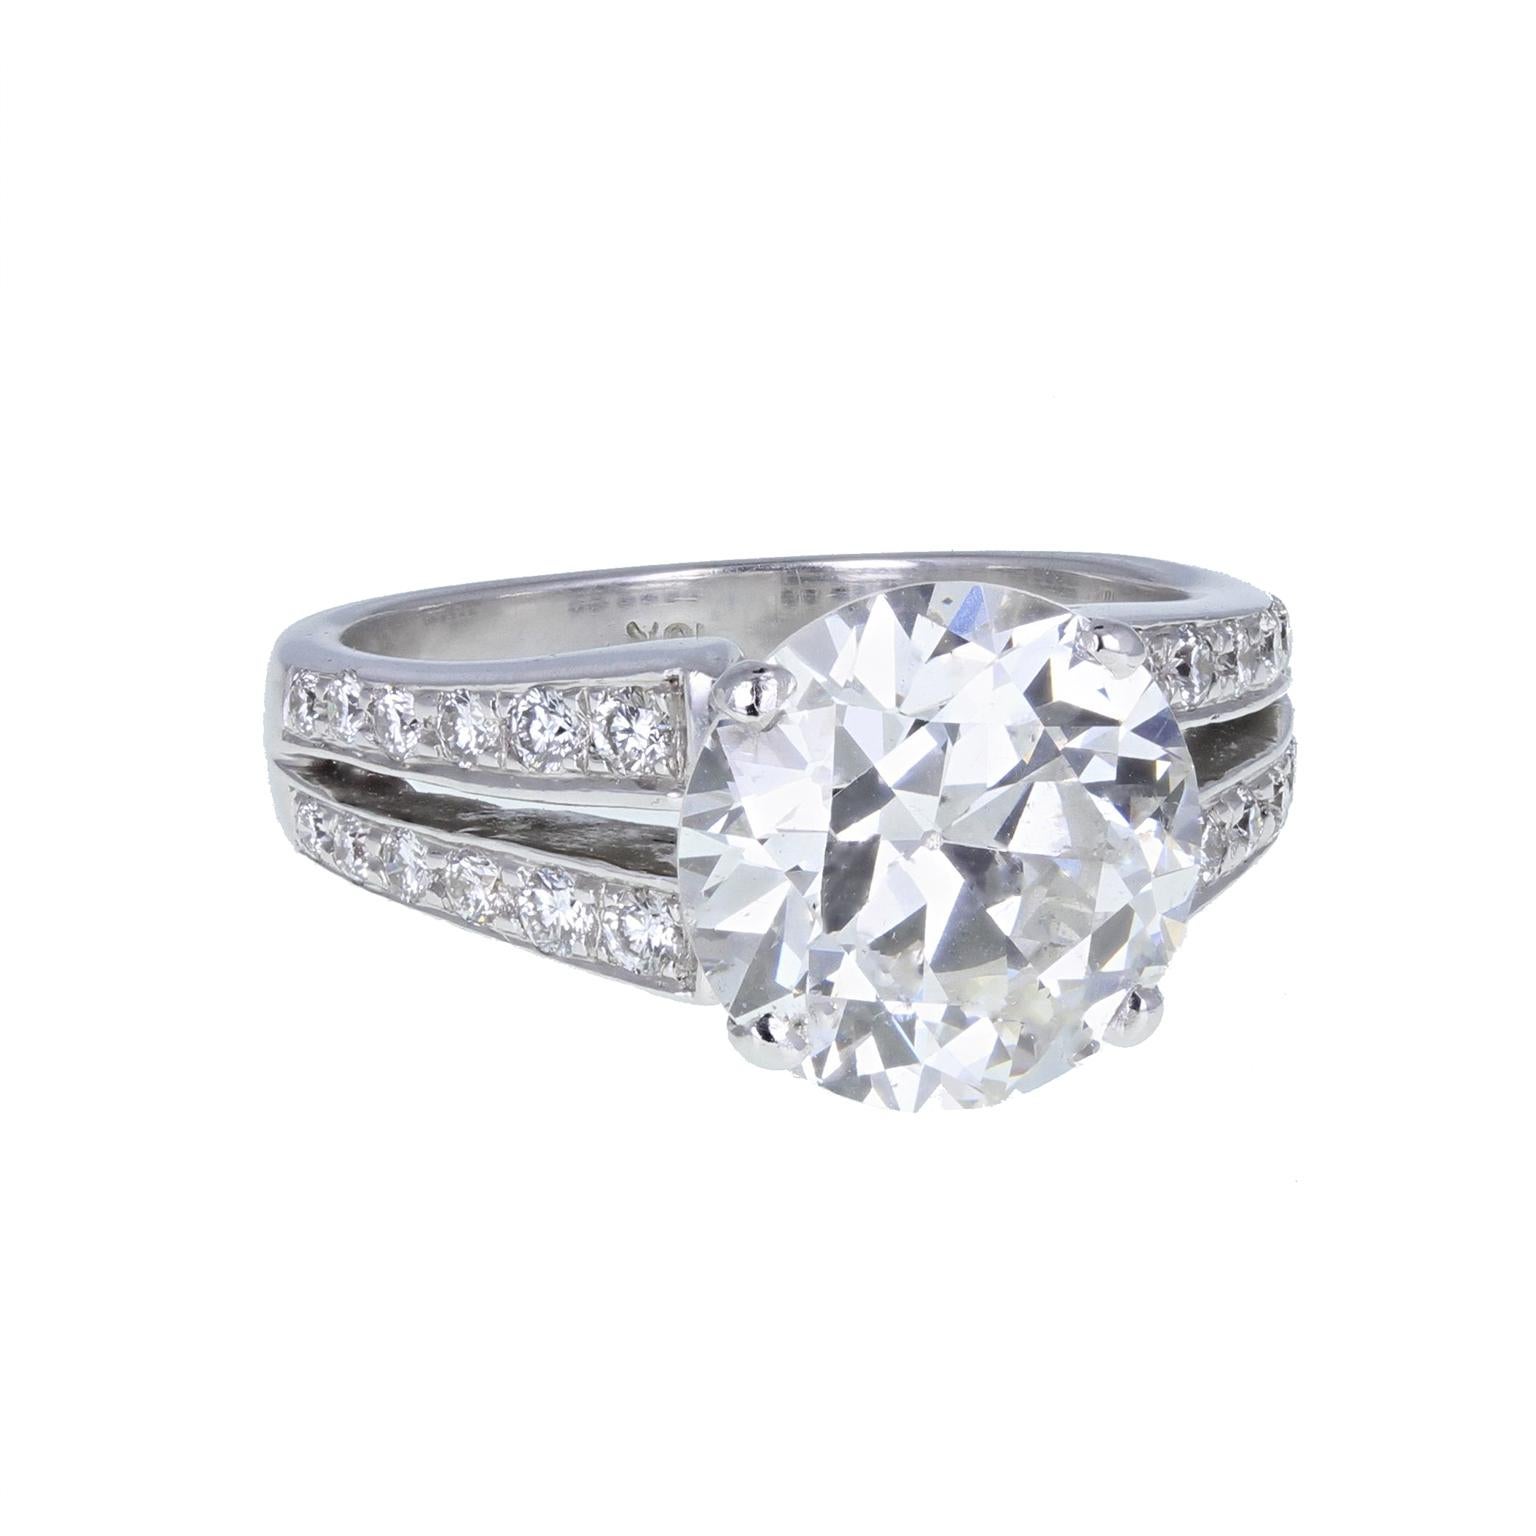 The exceptional round brilliant-cut diamond of 4.20 carats, F colour SI3 clarity is mounted in four claws, full of sparkle and scintillation. The split shoulders are set with melee diamonds to accent the principal diamond. The ring is accompanied by